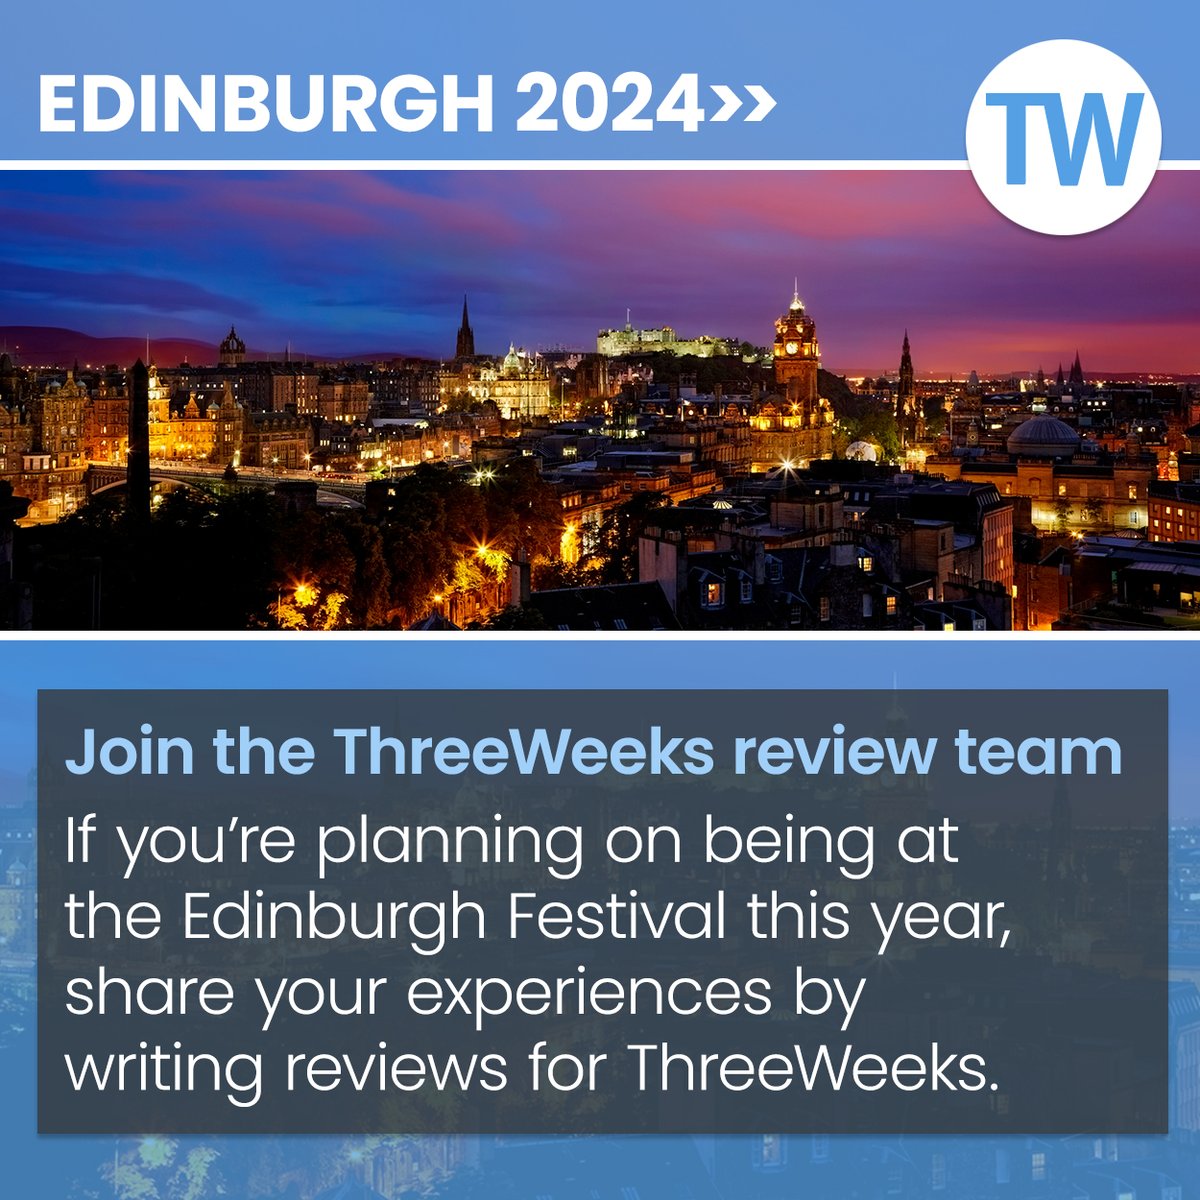 We are currently recruiting reviewers to join our team at Edinburgh Festival 2024 - info here: bit.ly/3JtrMkR